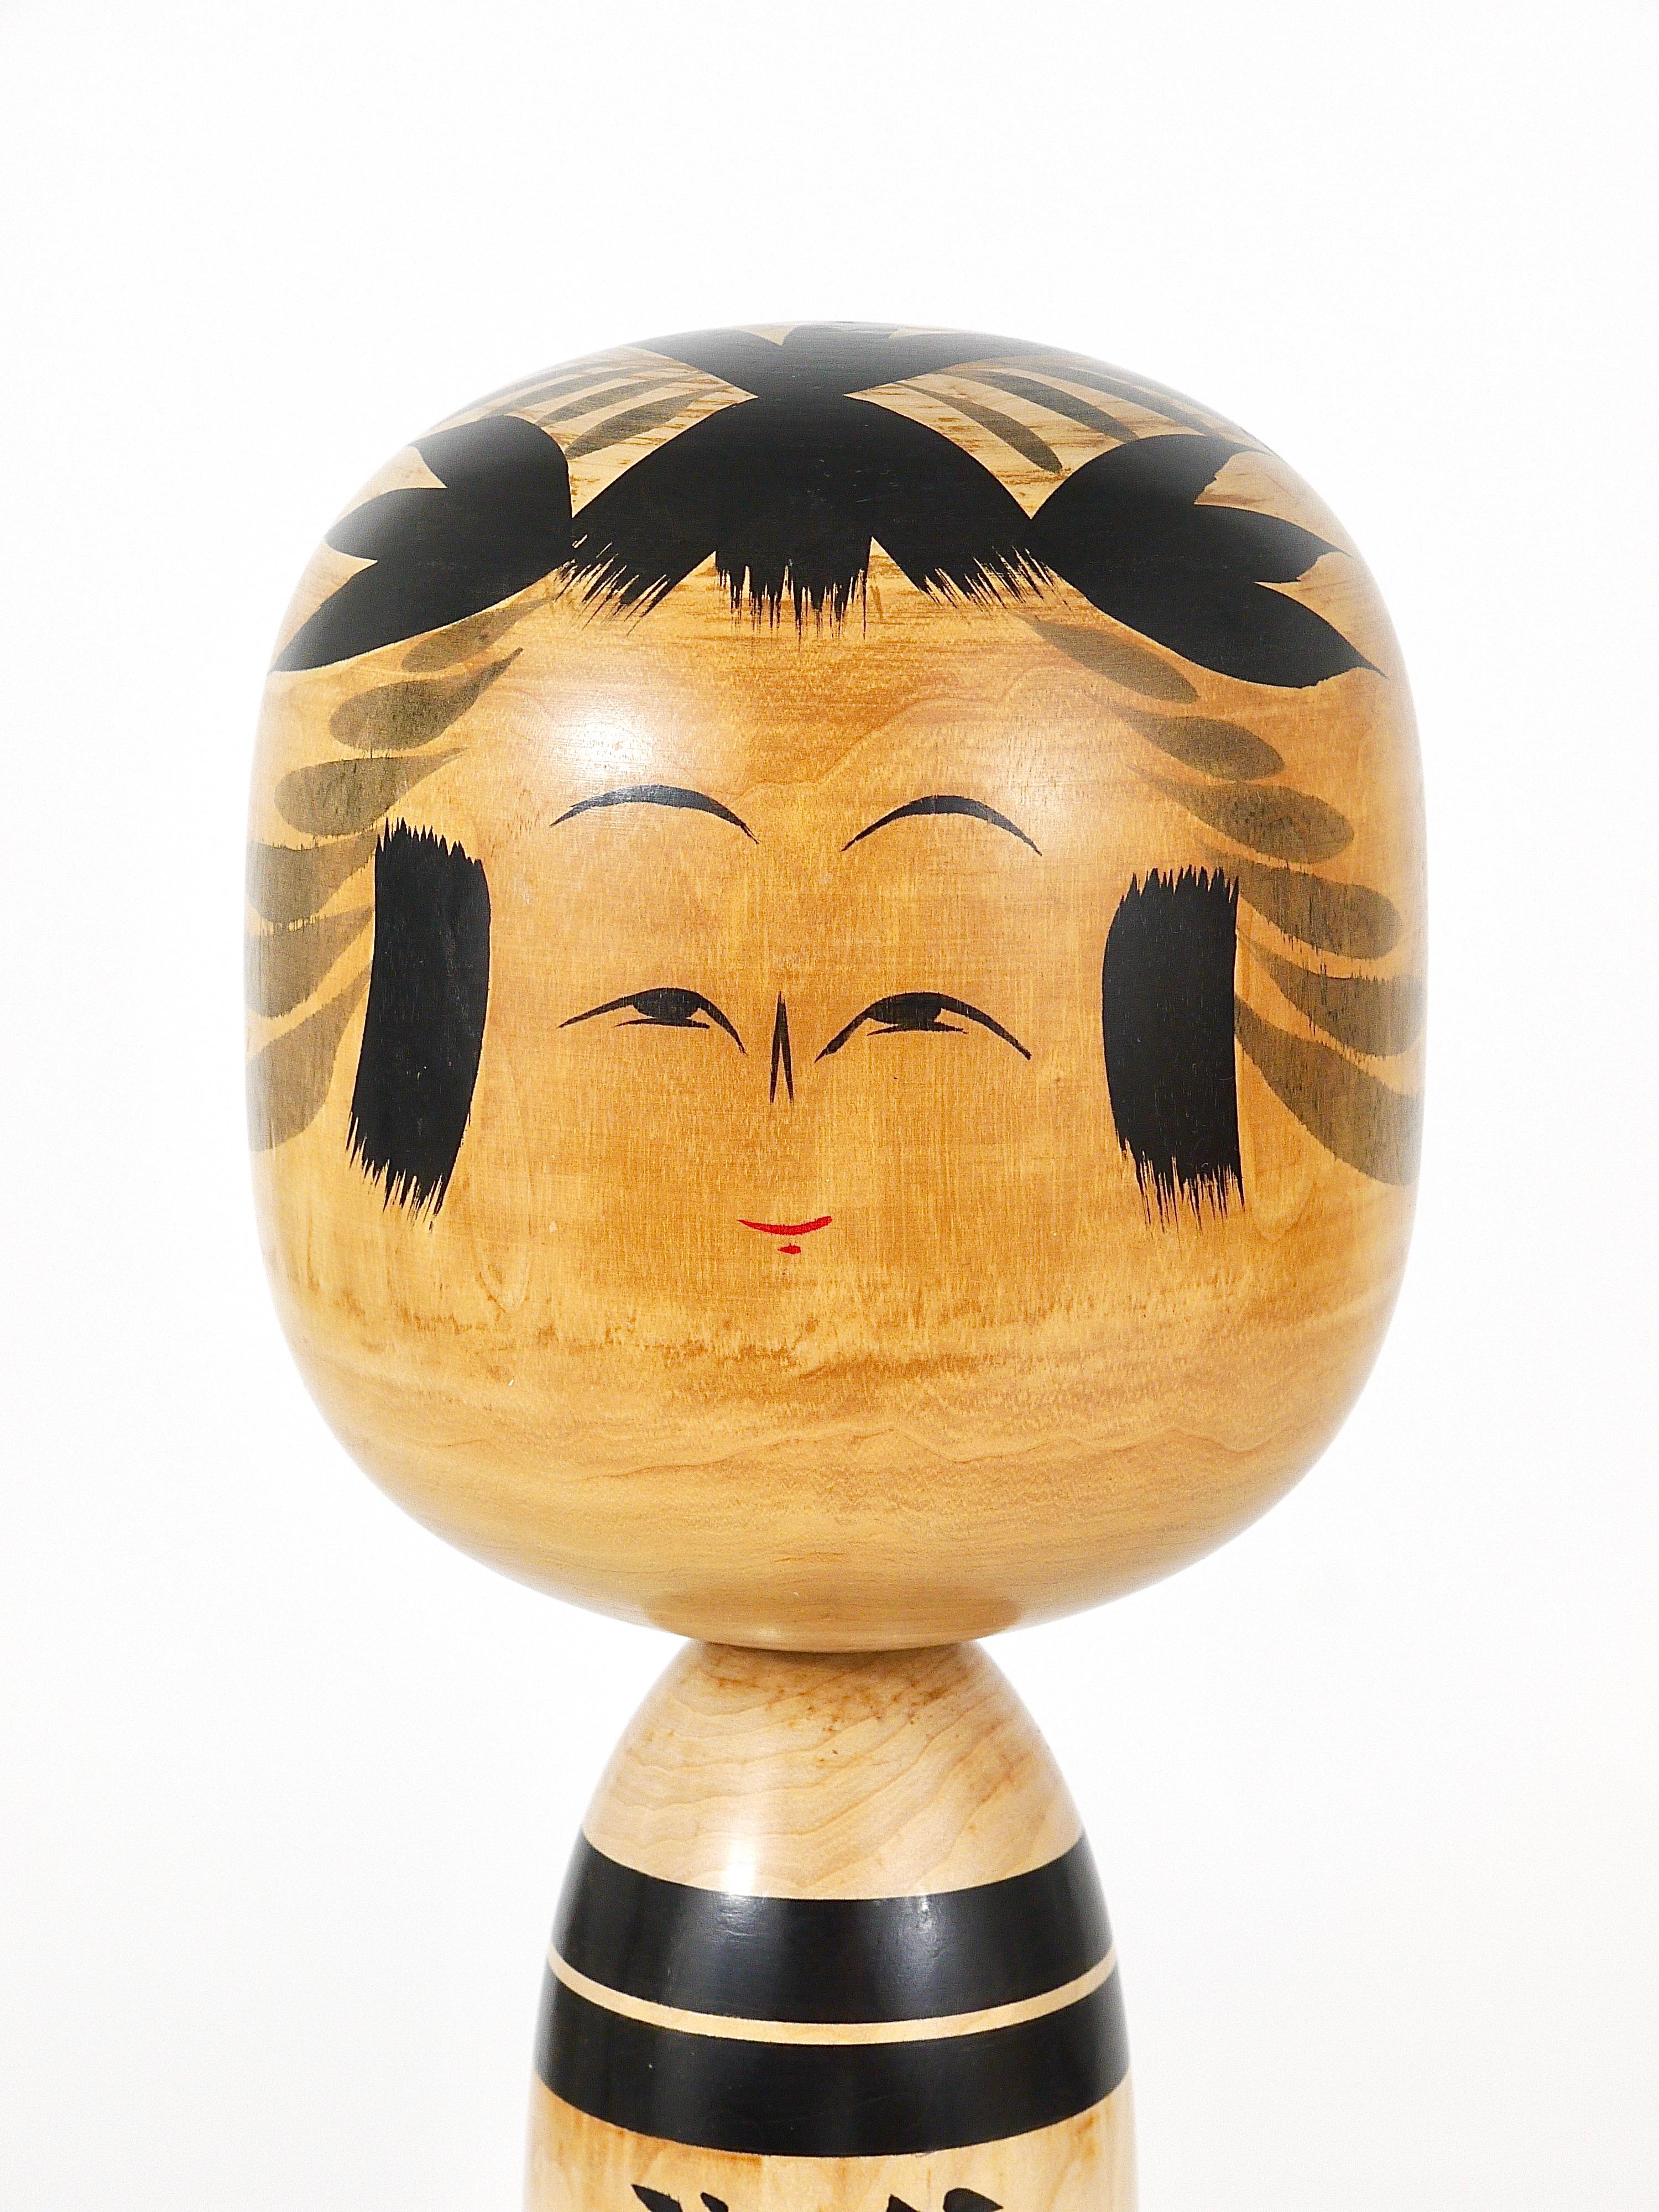 Hand-Carved Decorative Togatta Kokeshi Doll Sculpture from Northern Japan, Hand-Painted For Sale